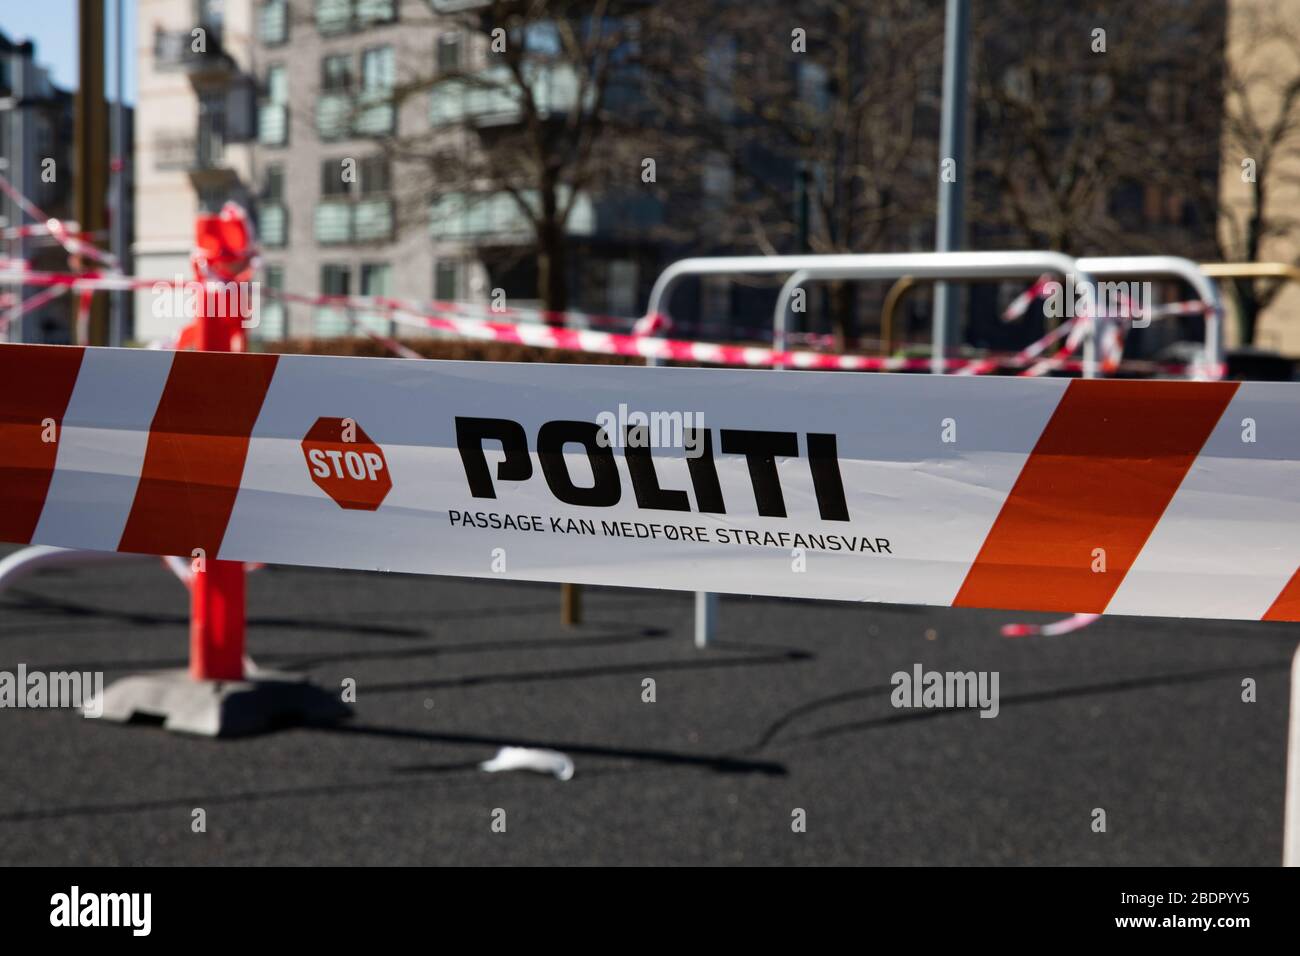 Public playground and training facilities have been sealed off by police during the corona lockdown in Copenhagen. Stock Photo